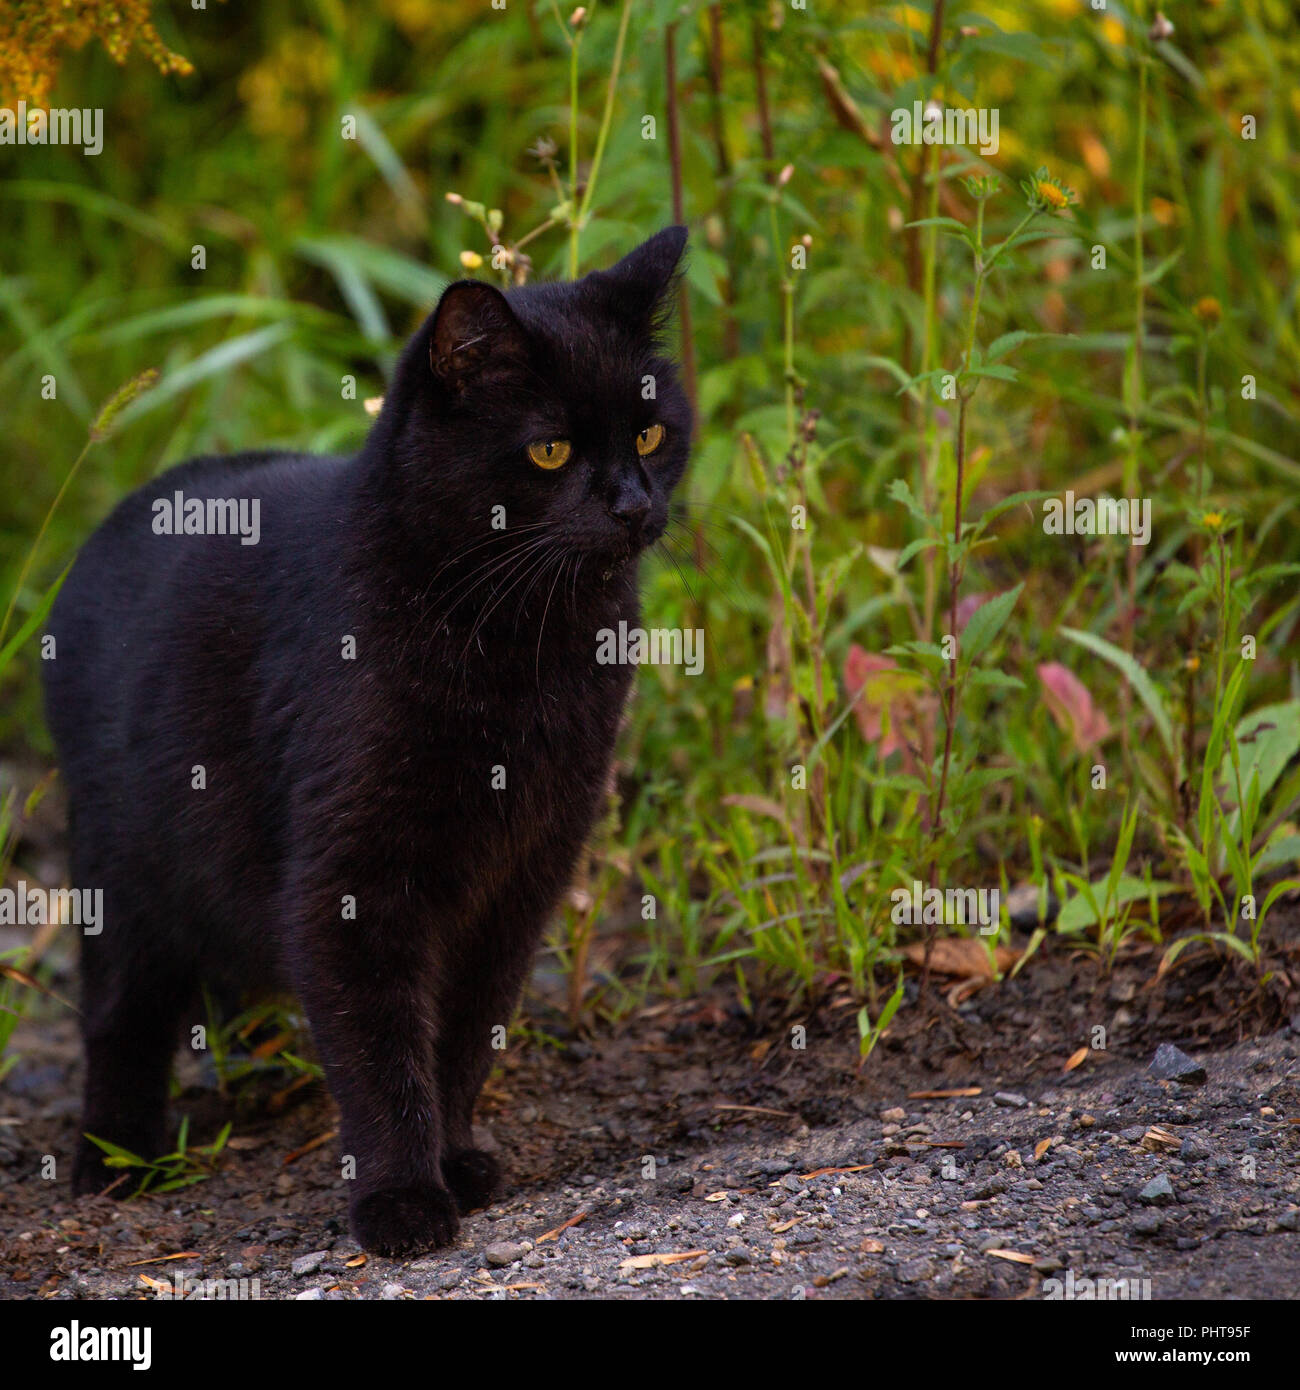 Gorgeous black cat with golden eyes, sitting on the side of the road, intensely focused on something across the street, out of the frame. Stock Photo